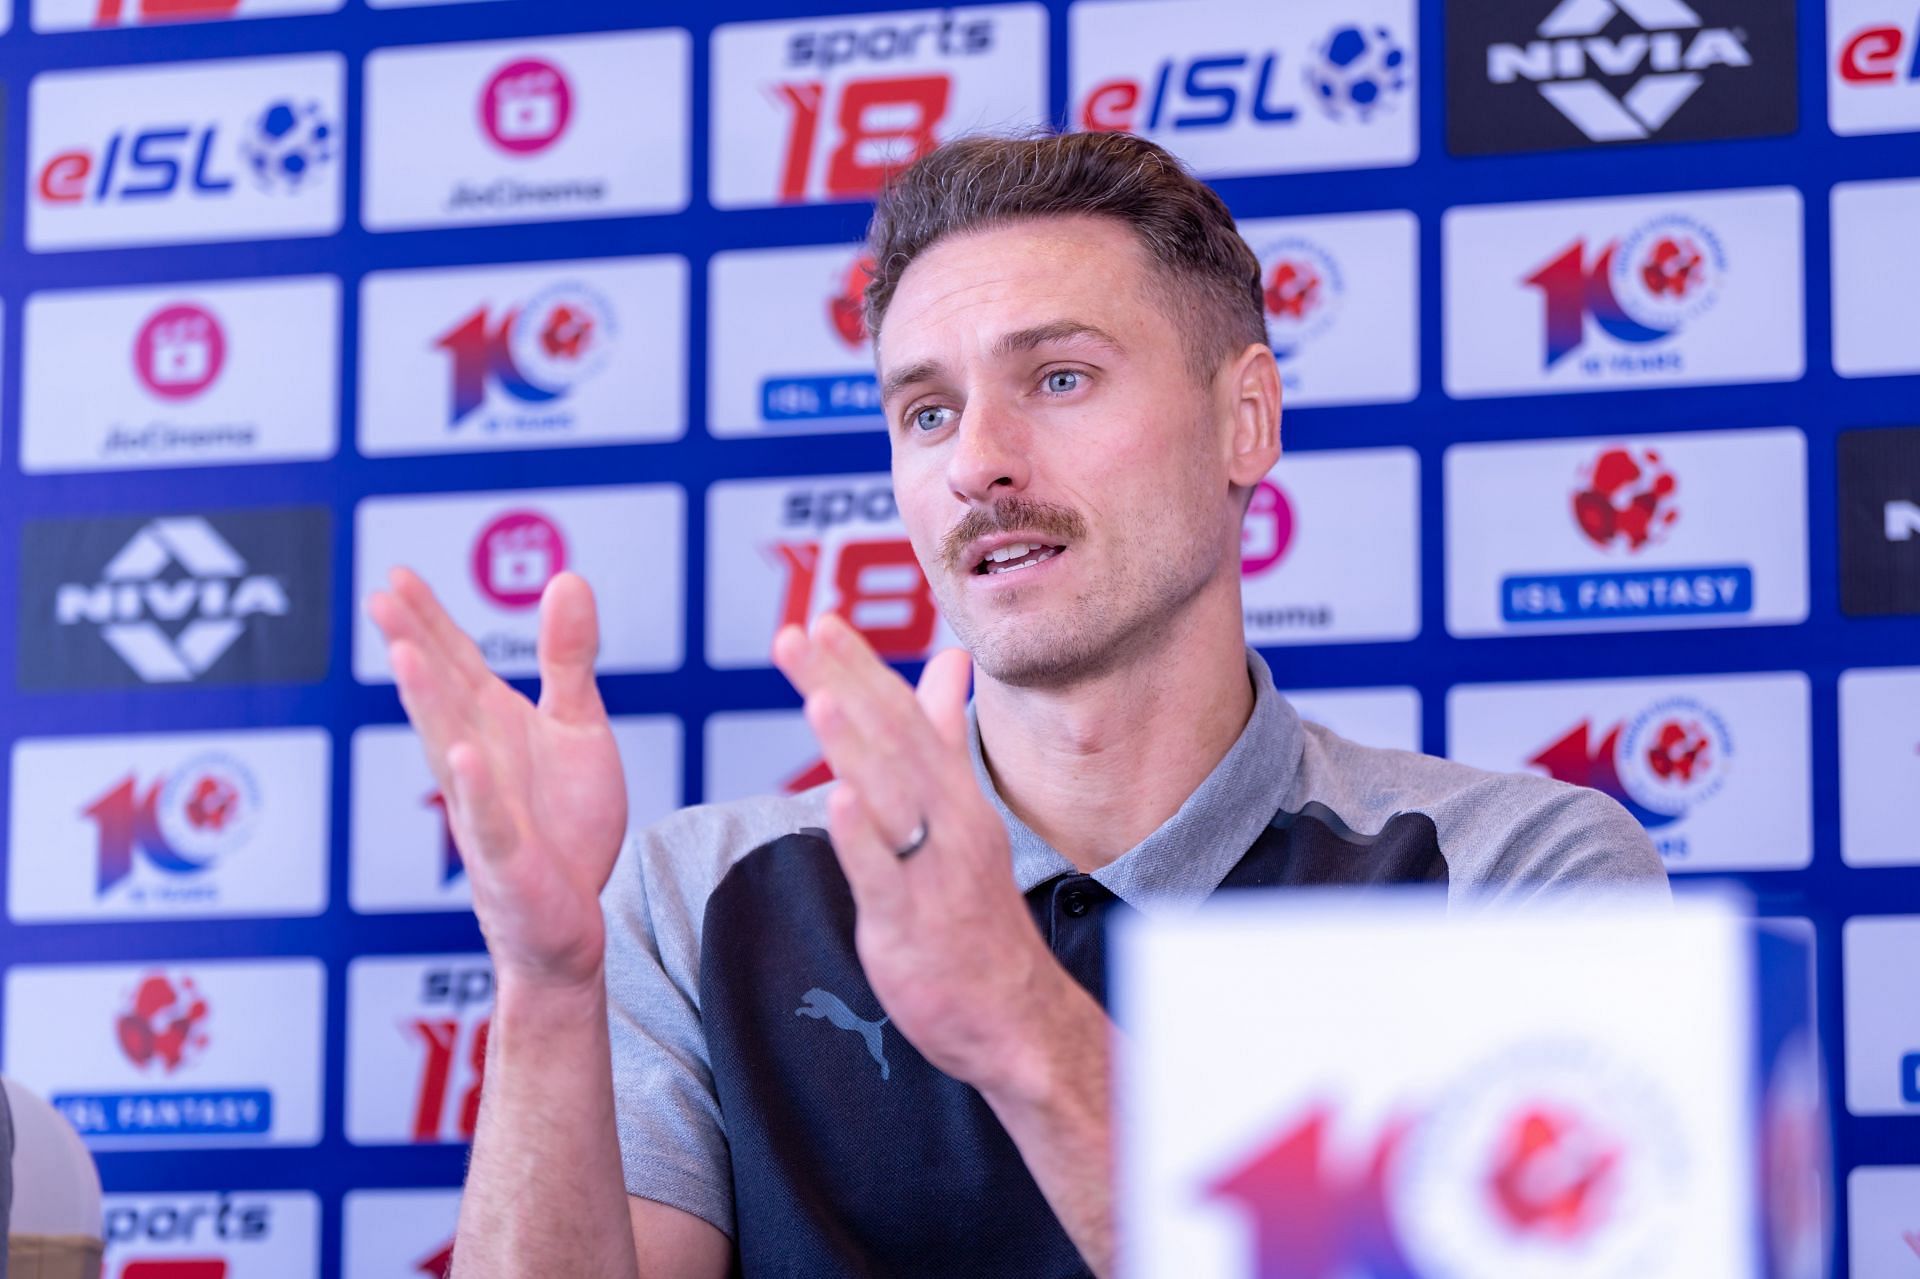 Defender Rostyn Griffiths has expressed his confidence in new Mumbai City head coach Petr Kratky.